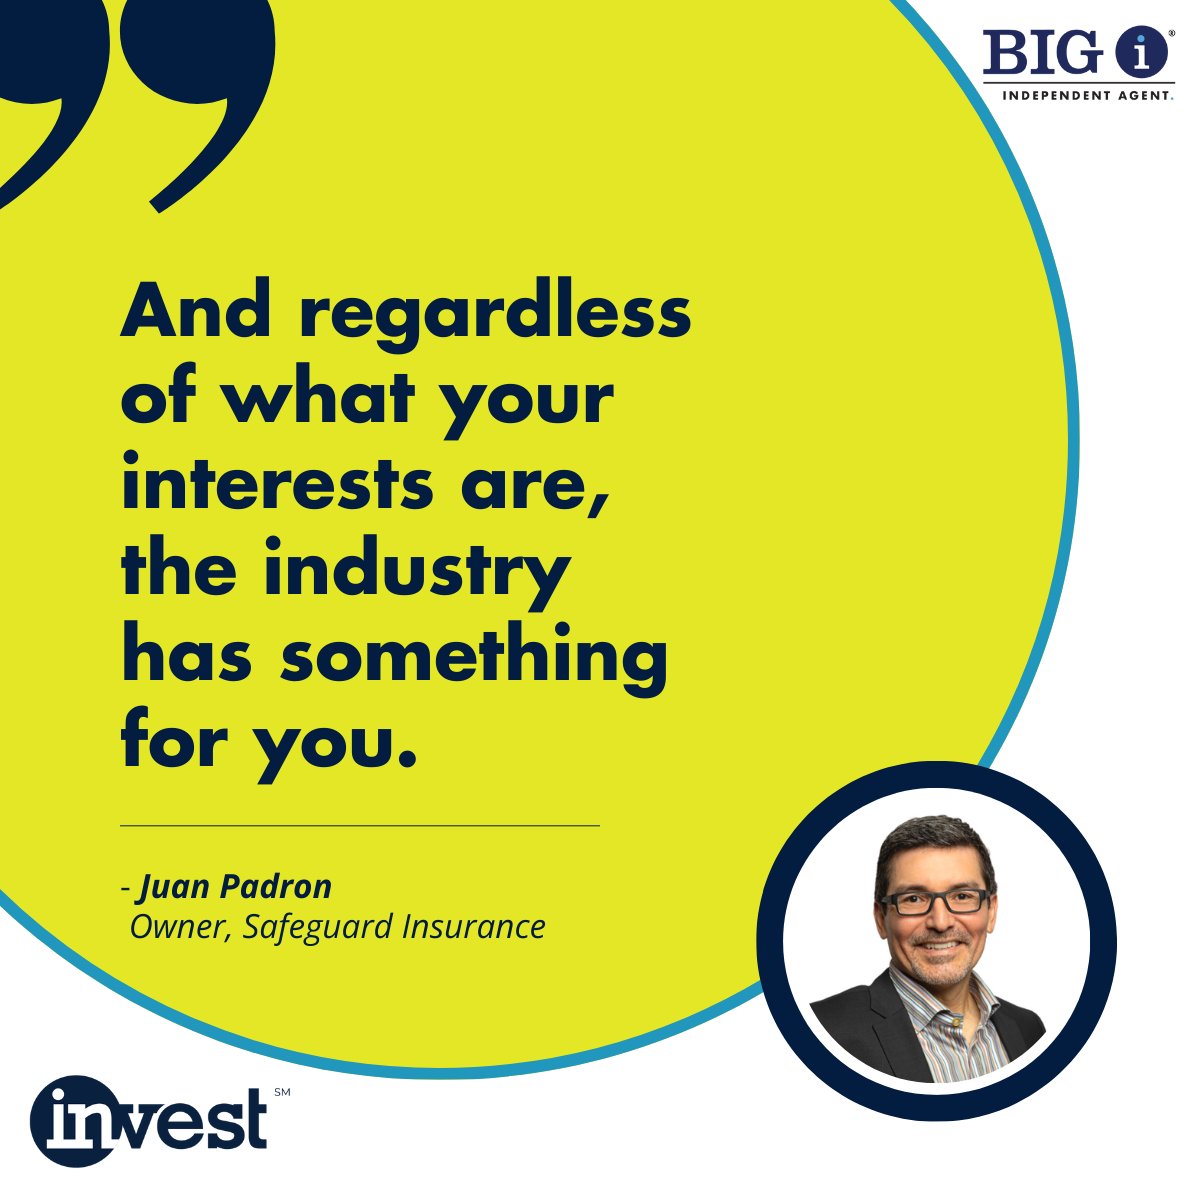 Insurance Careers Month is a great opportunity to recognize the diversity of careers in insurance and introduce various groups, such as students entering the job market and career changers, to the industry. #insurancecareersmonth